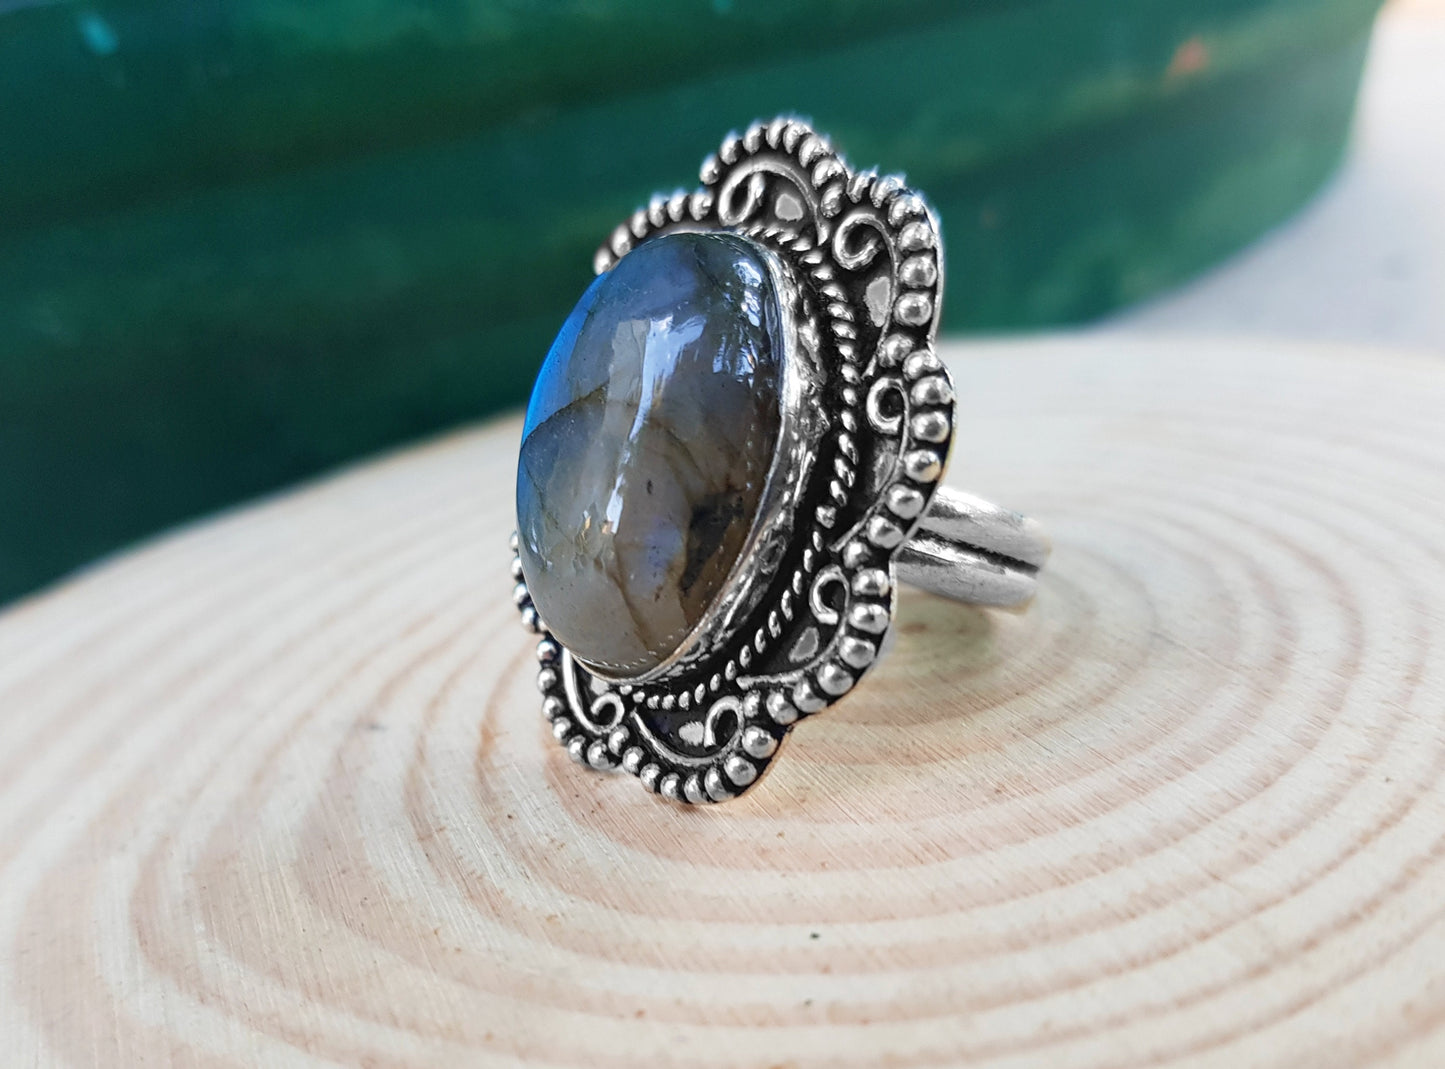 Labradorite Gemstone Ring In Sterling Silver Size US 8 1/2, Statement Ring, Crystal Ring, Boho Rings, Gypsy Jewelry Unique Gift